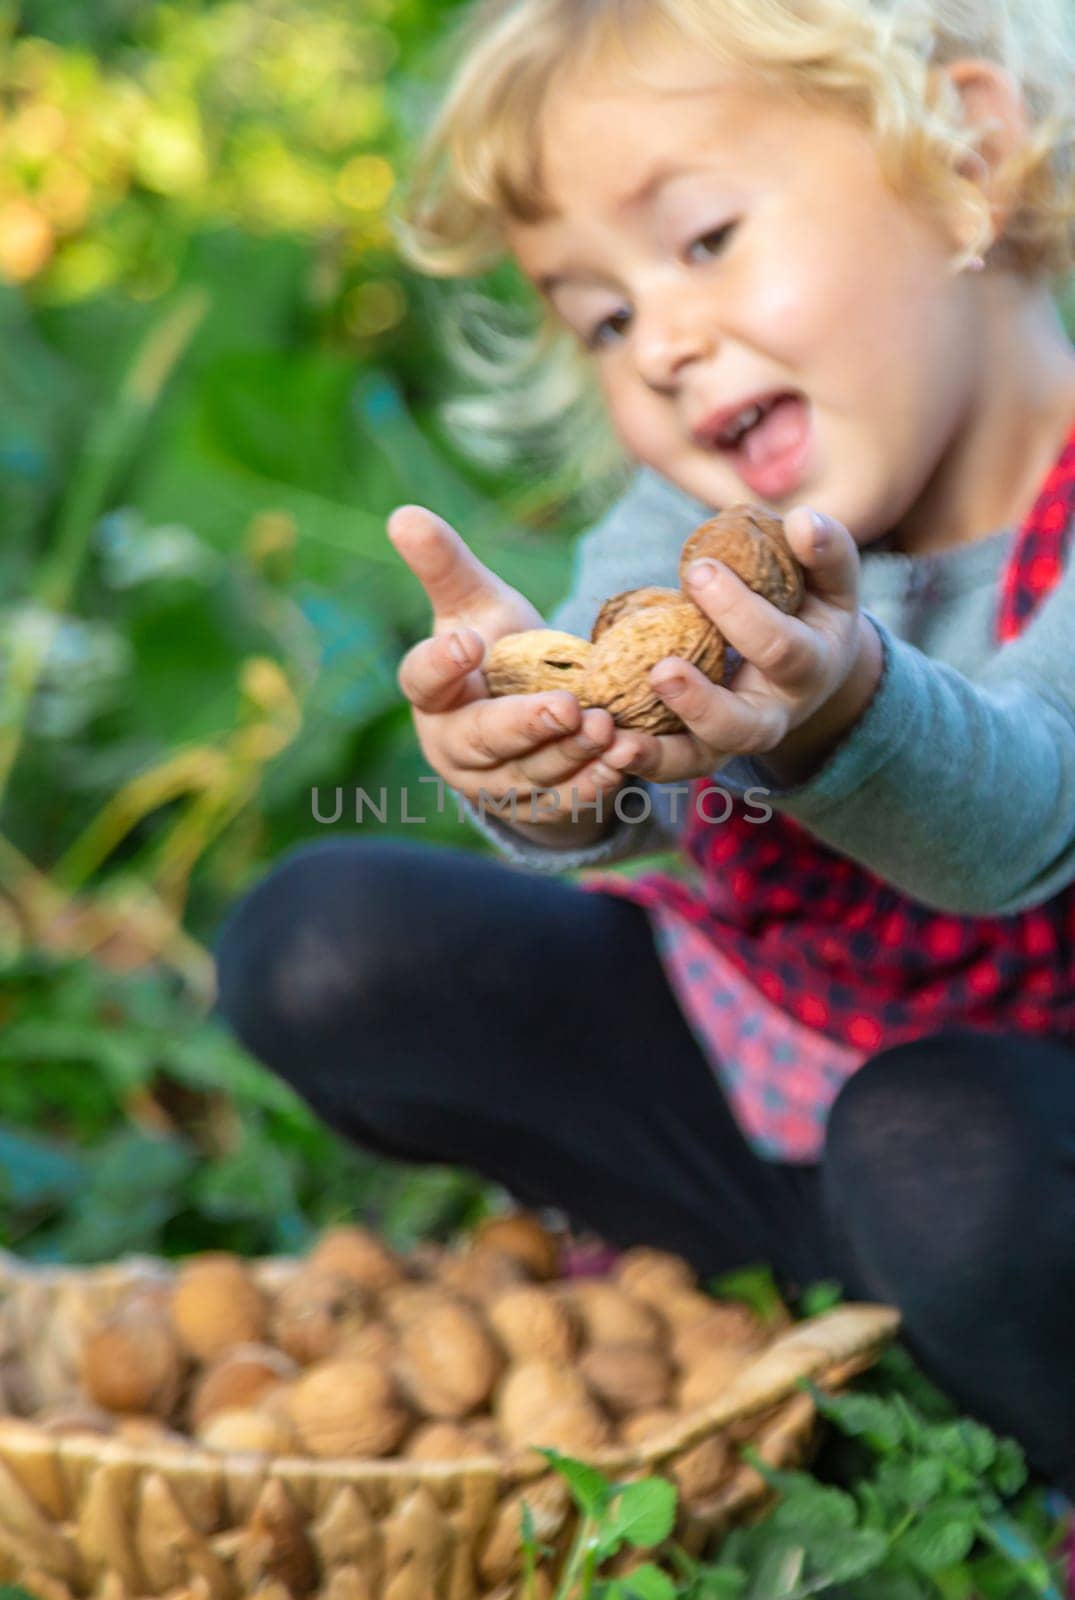 A child harvests nuts in the garden. Selective focus. Food.